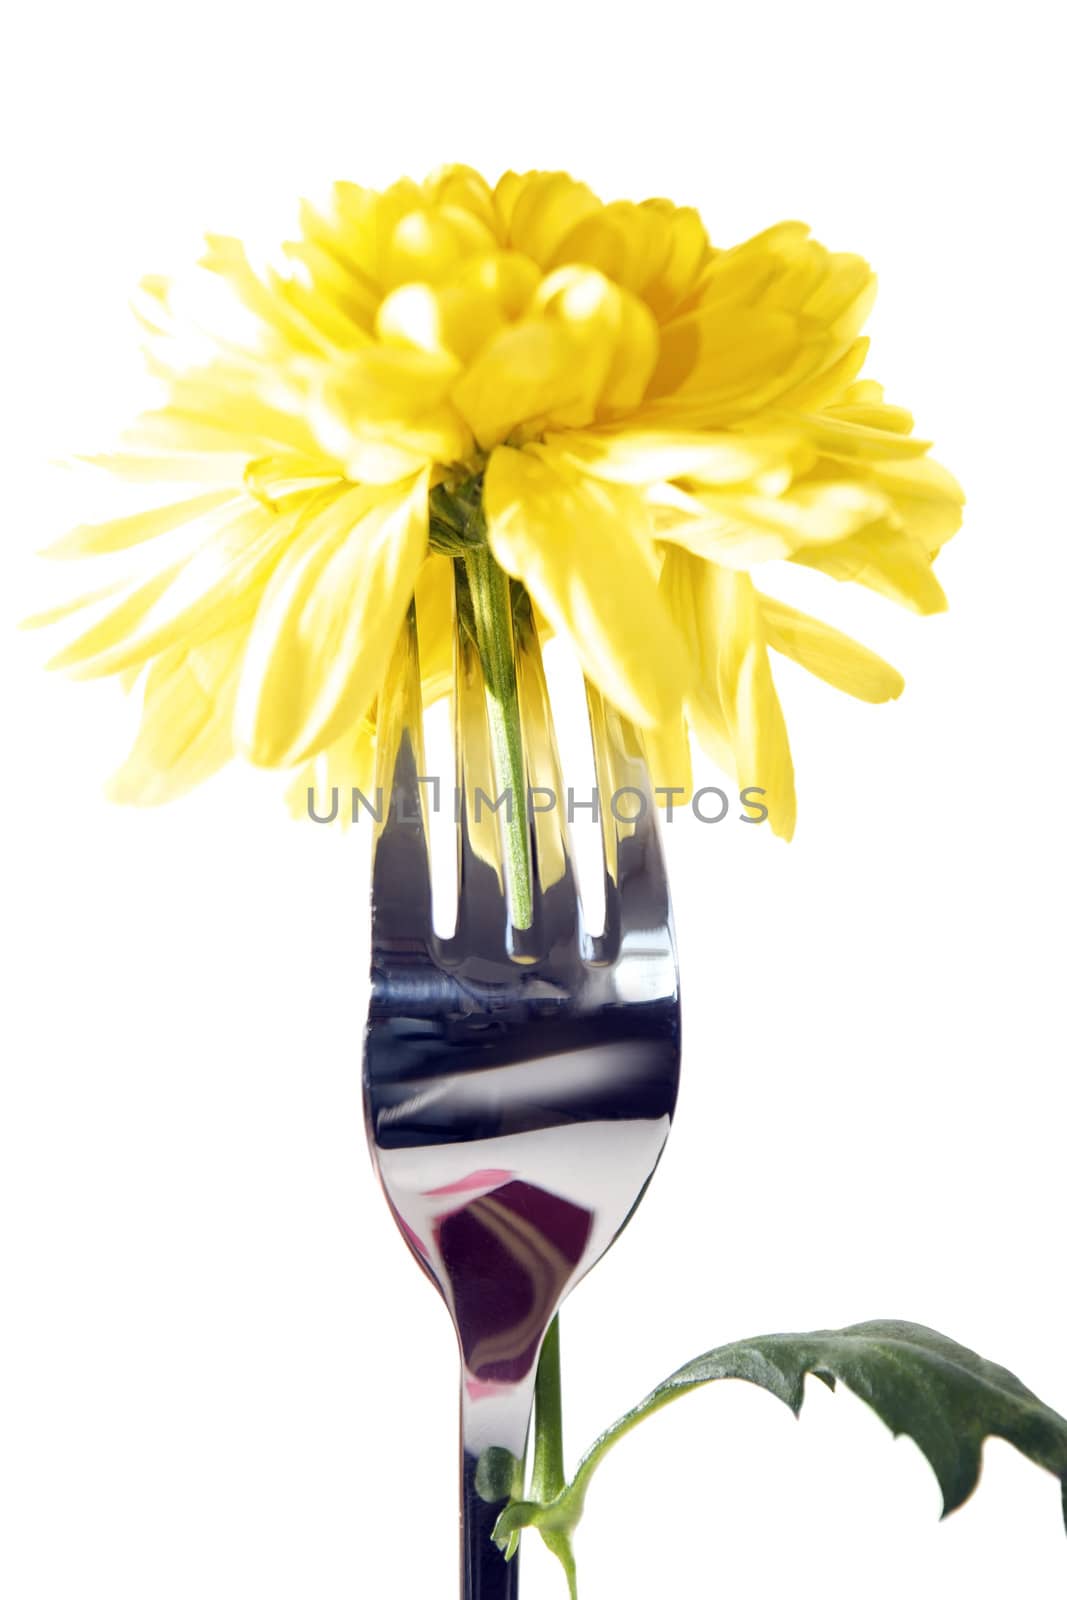 silver fork stuck into dahlia for concept on romantic dining against a white background